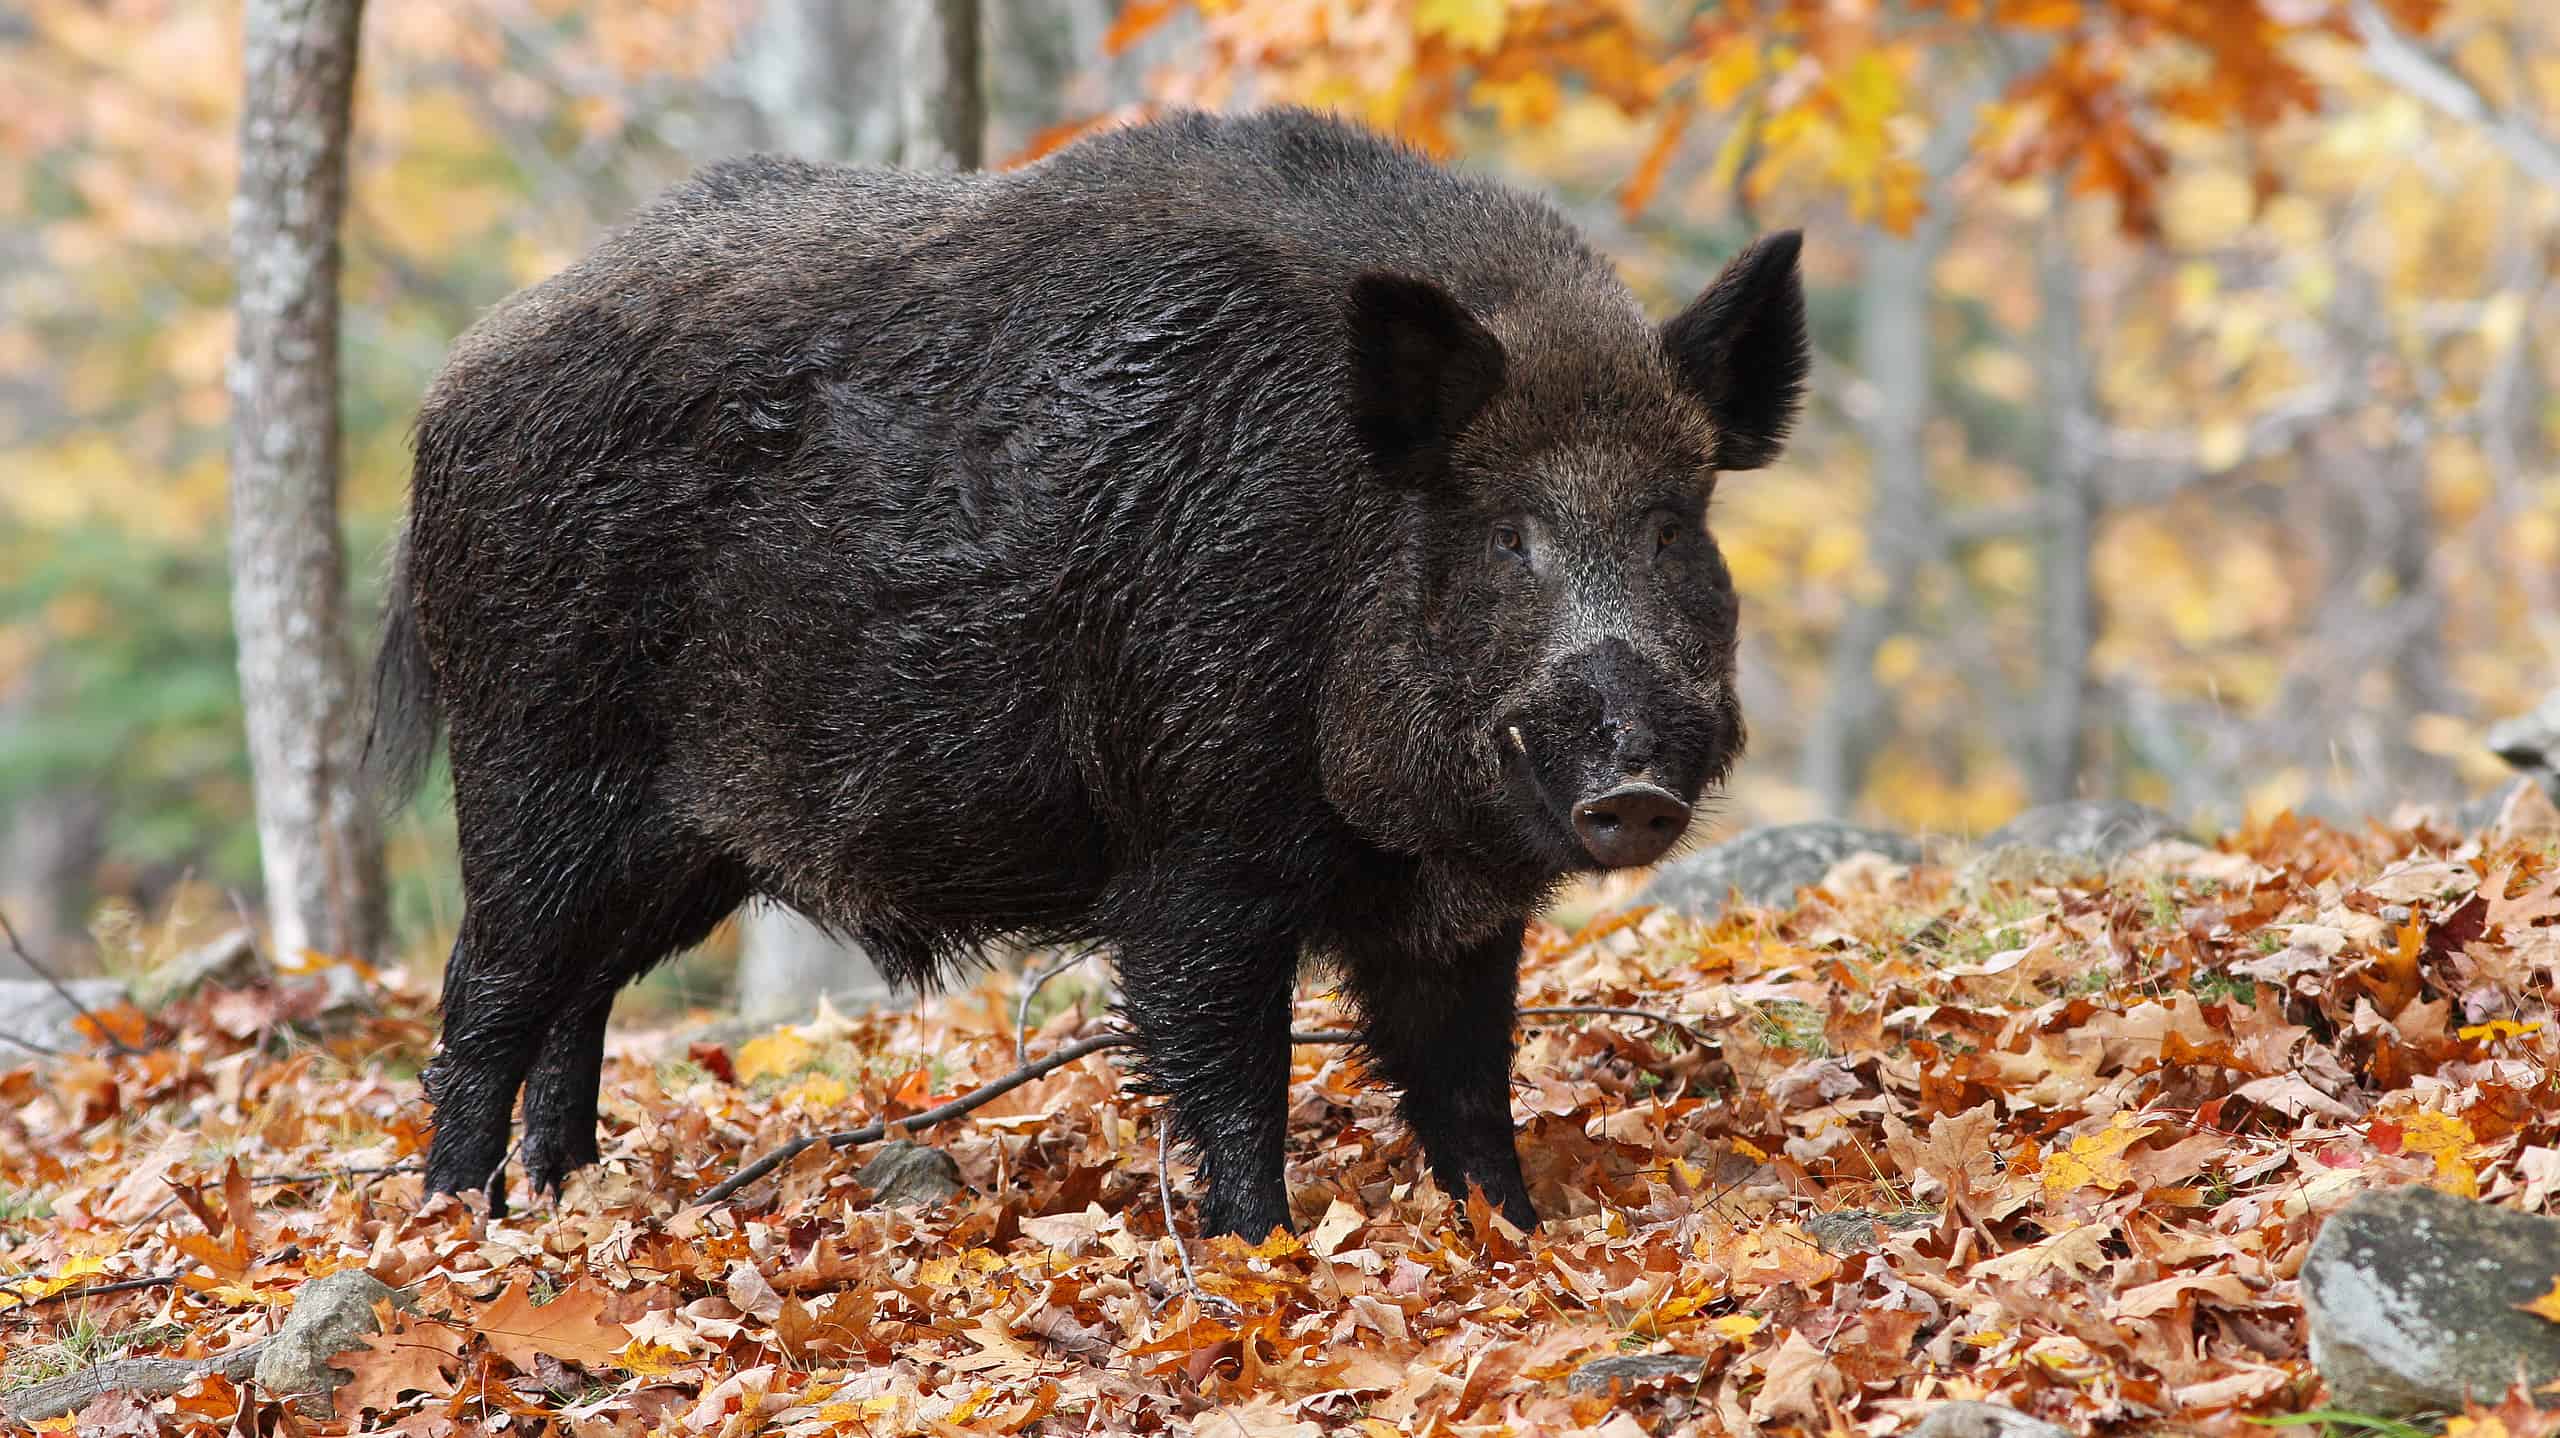 A wild hog, or wild boar, in its natural habitat. These omnivorous animals have a strong sense of smell and sharp tusks used for defense.